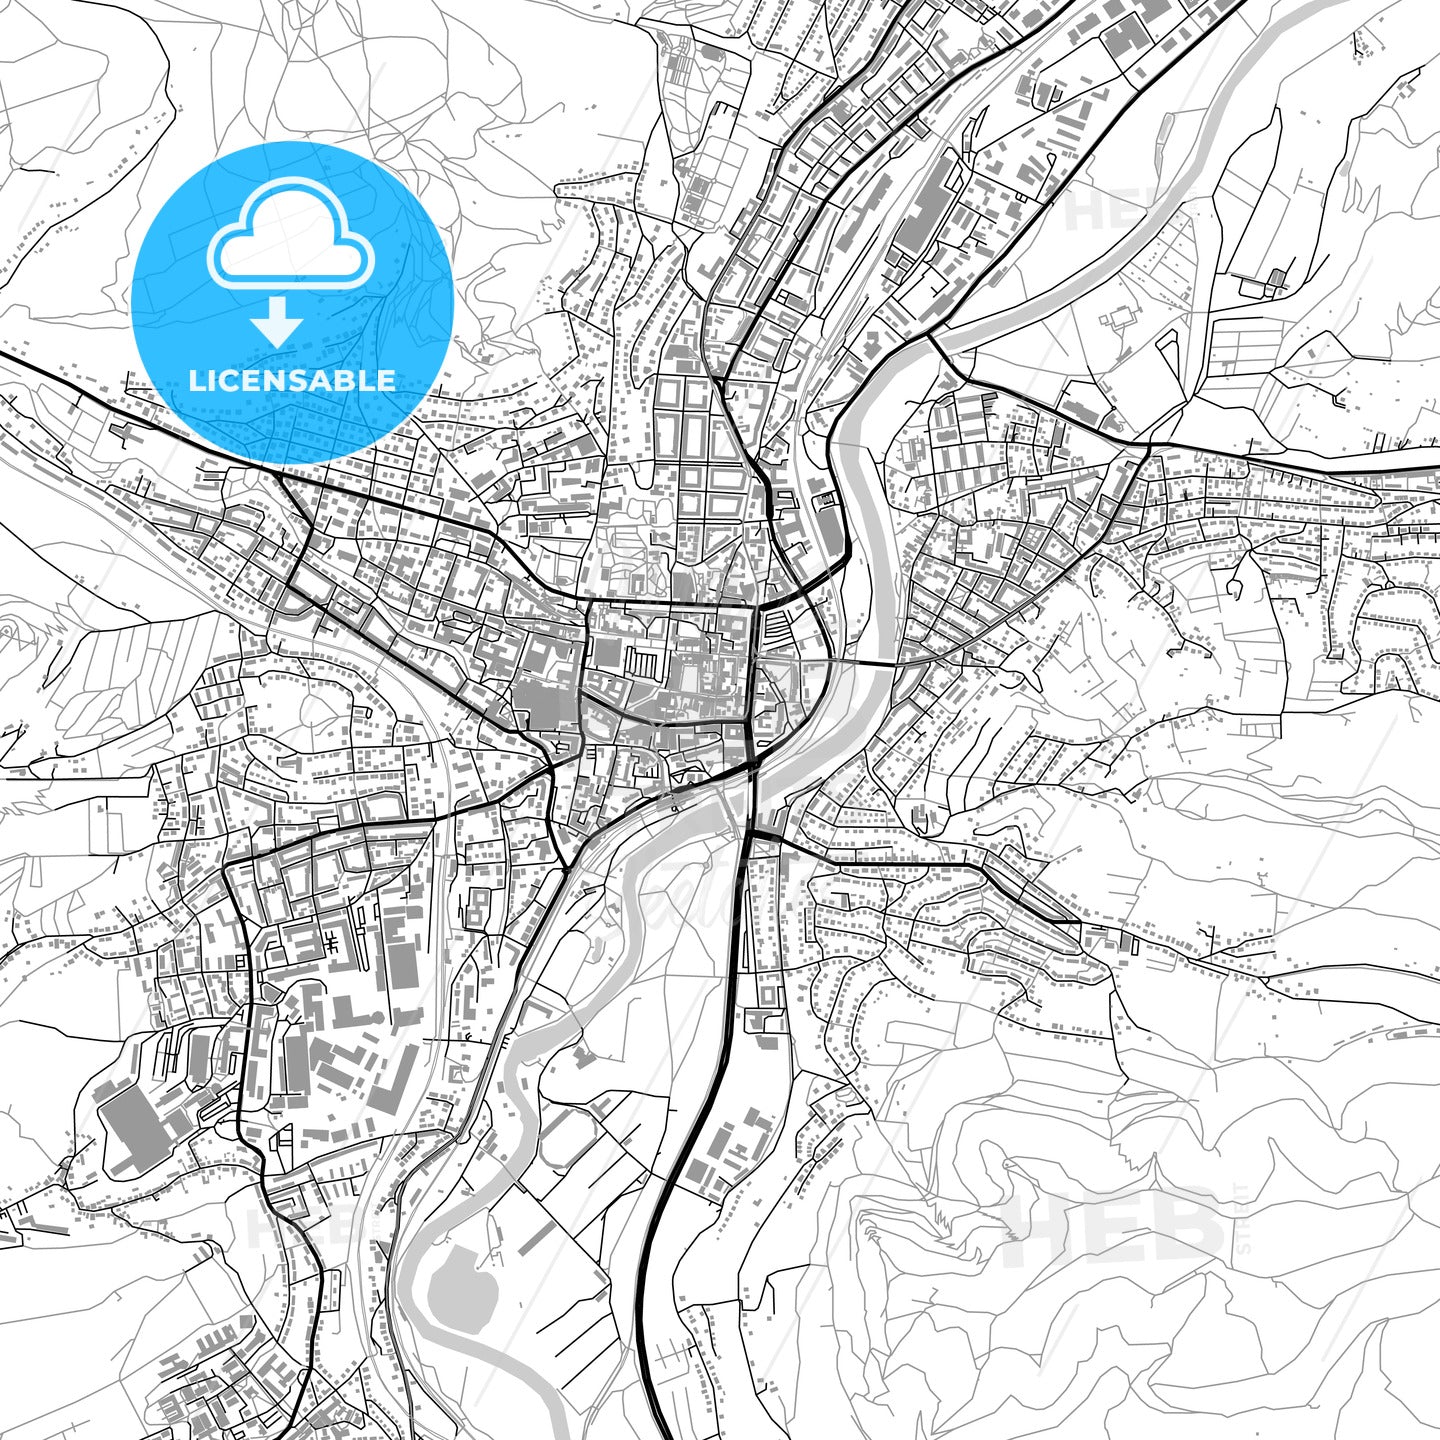 Jena, Germany, vector map with buildings